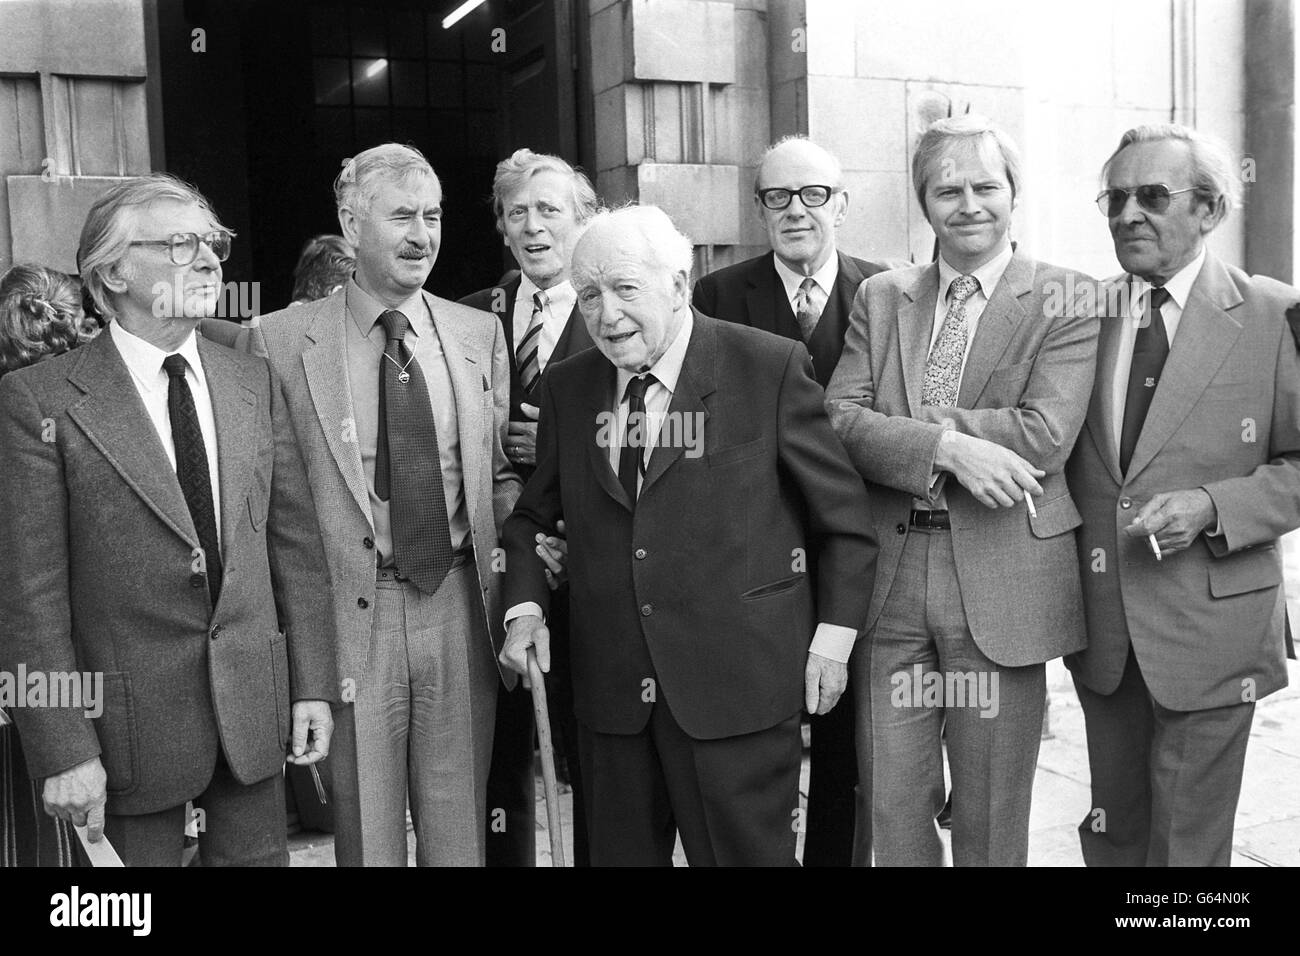 The cast of Dad's Army at St Martin-in-the-Fields, following a memorial service for Arthur Lowe, who played Captain Mainwaring. (l-r) Clive Dunn, Bill Pertwee, writer Jimmy Perry, Arnold Ridley, Frank Williams, Ian Lavender and John Le Mesurier. Stock Photo